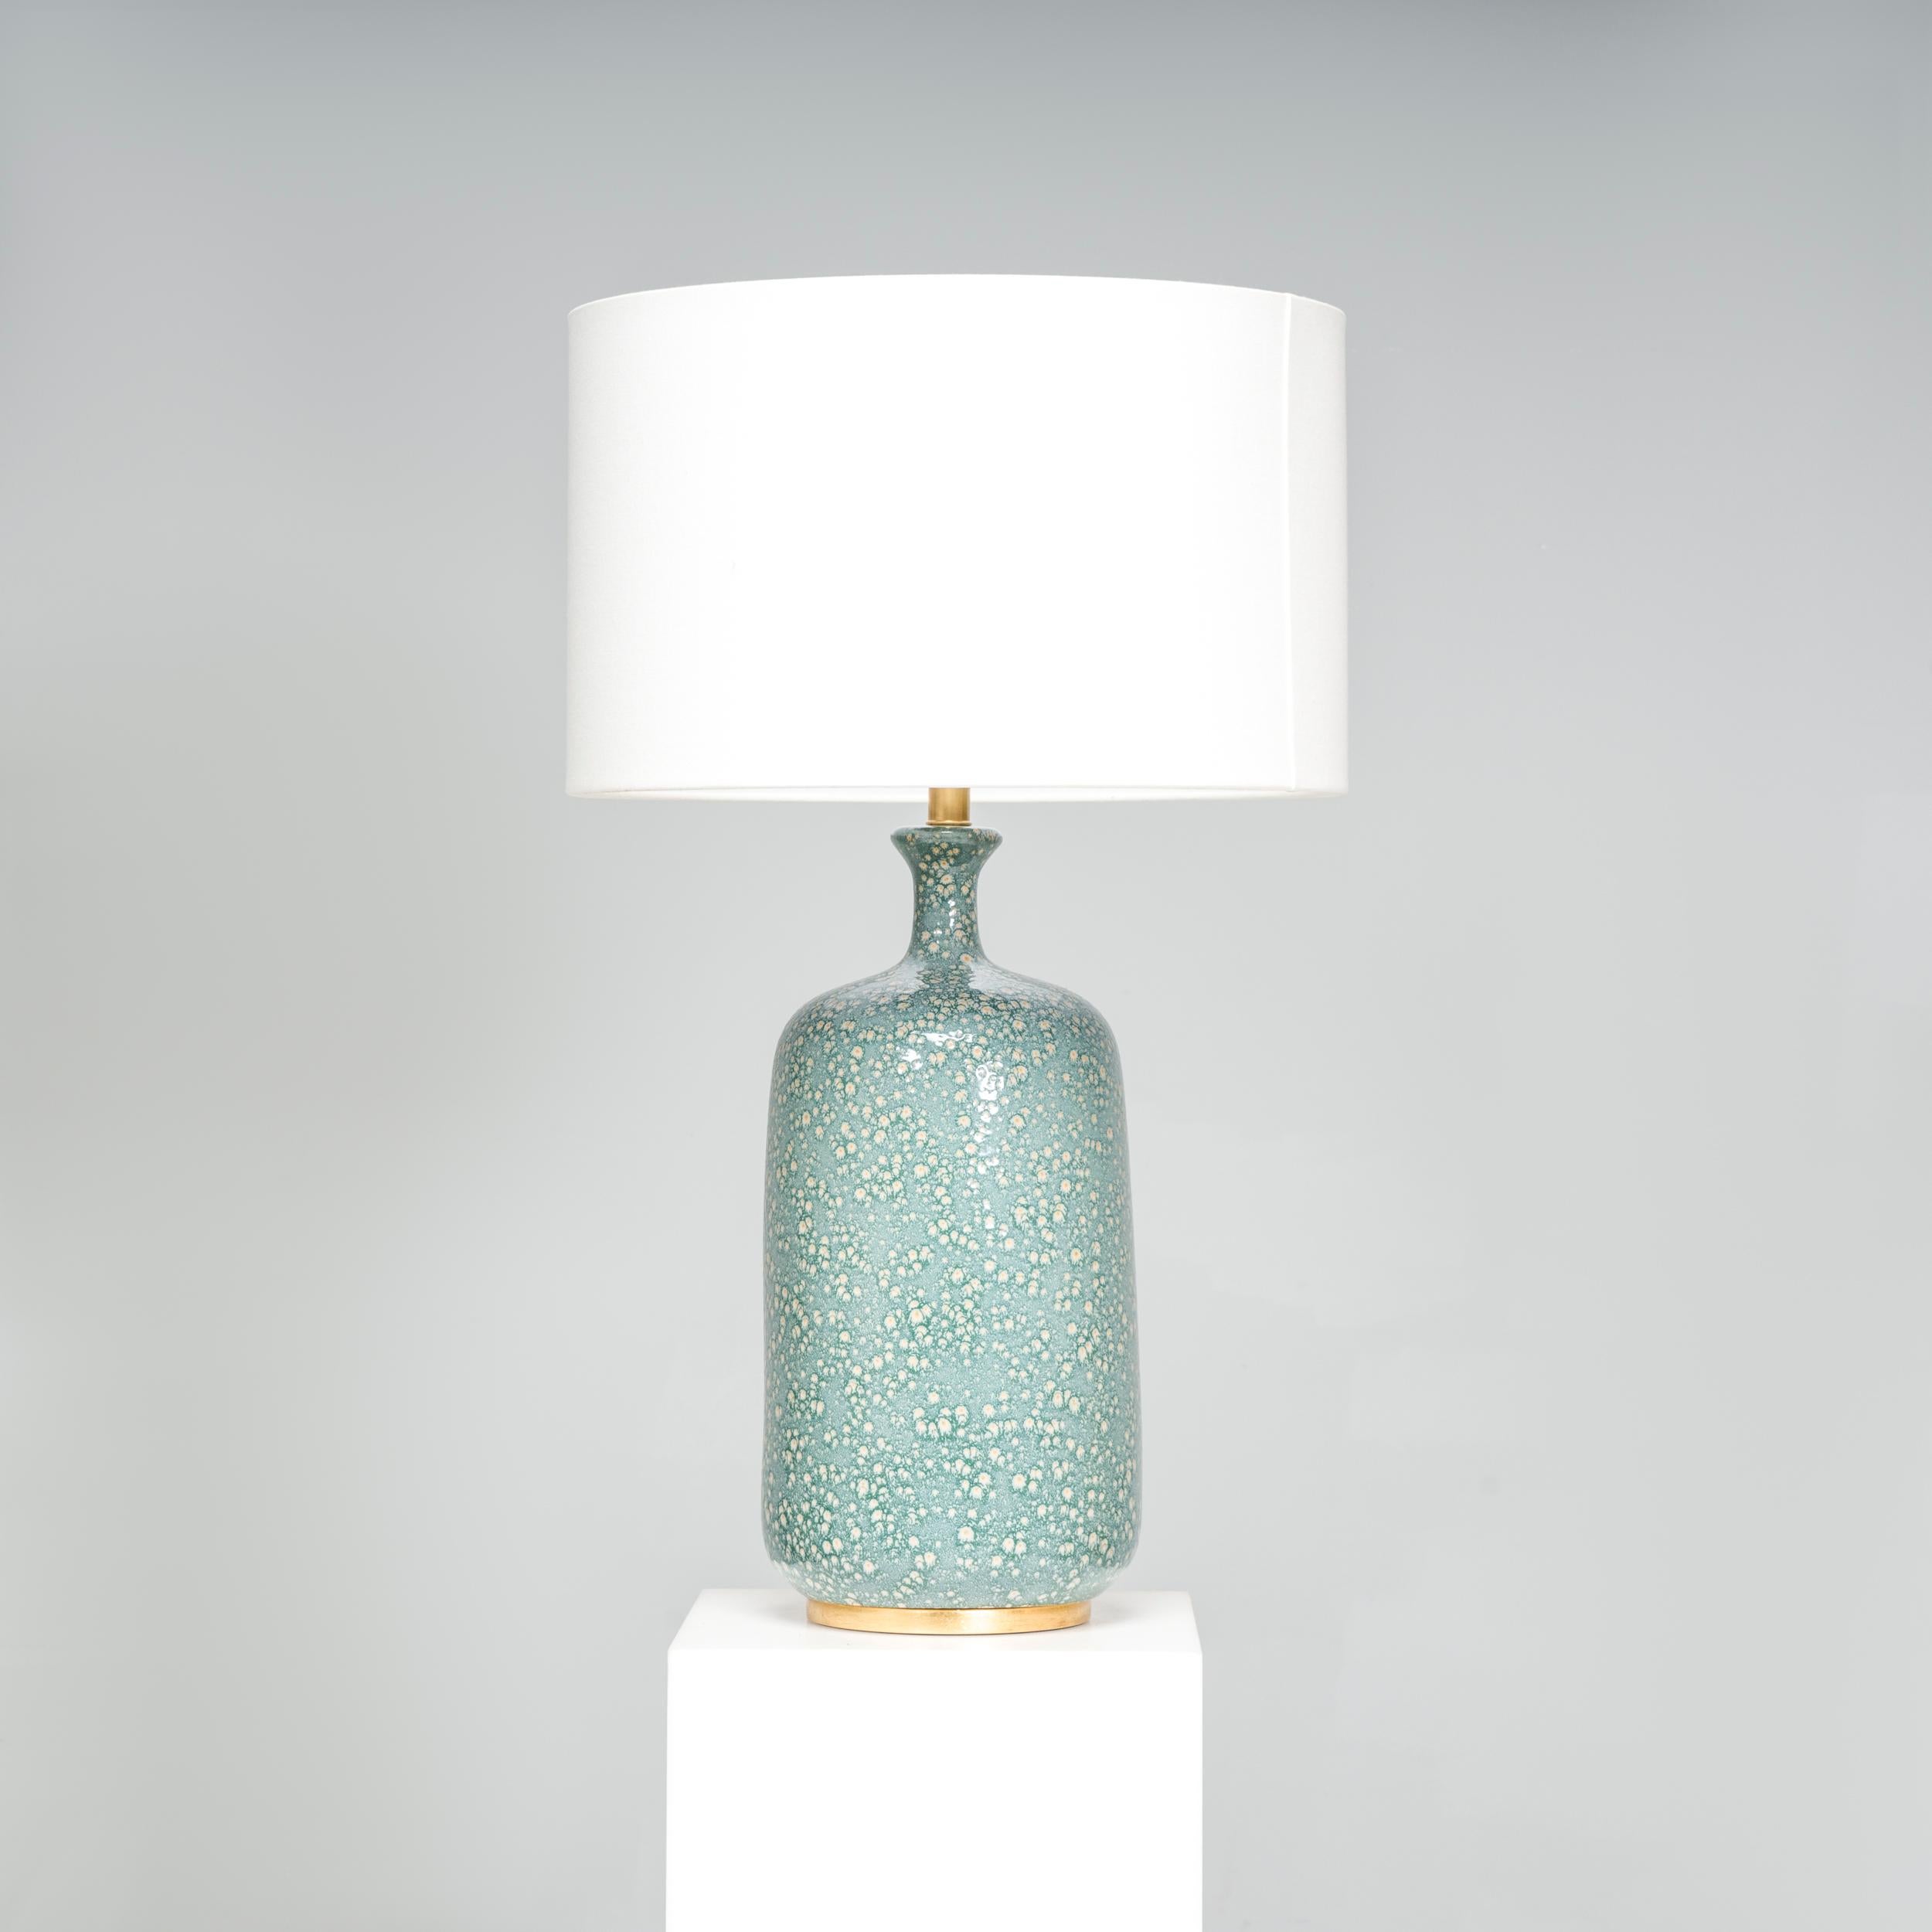 The ceramic table Lamp has a beautiful design that would elevate any living space or bedroom. Made by Visual Comfort designed by AERIN.

 An added touch of sophistication, the brass detailing complements the blue tones of the tall drum shaped